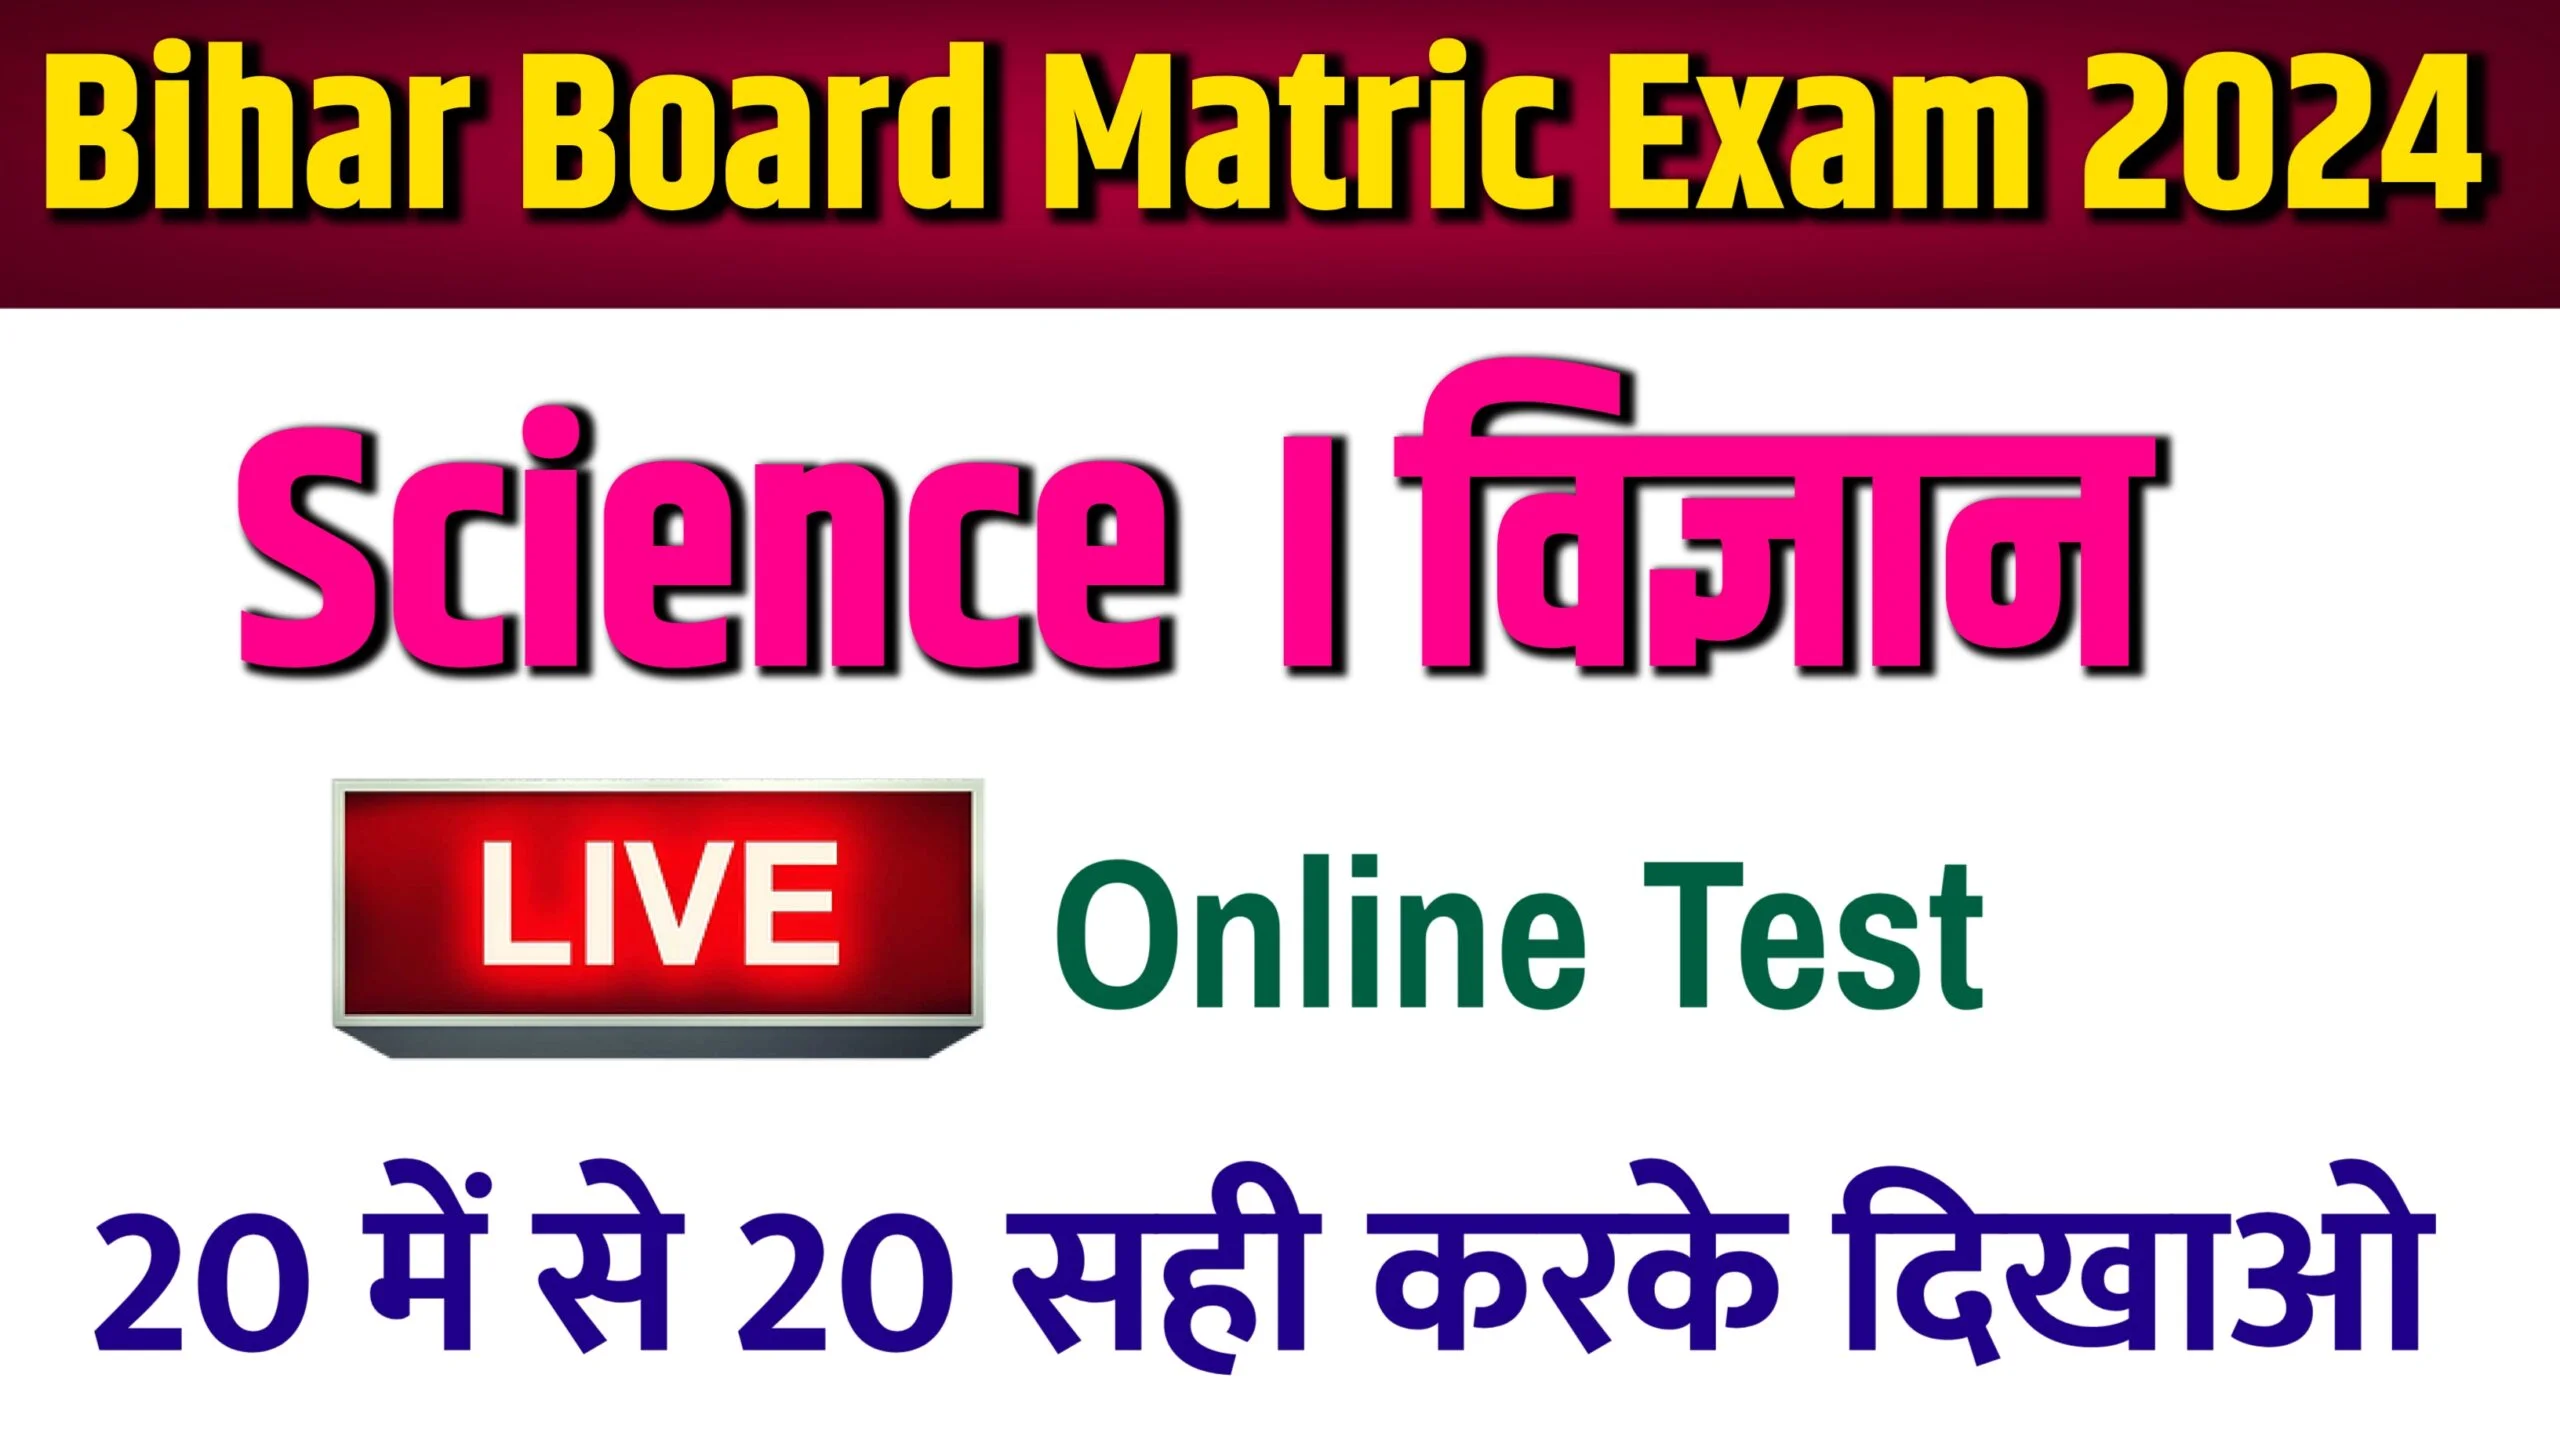 Class 10 Science Online Test BSEB 2024